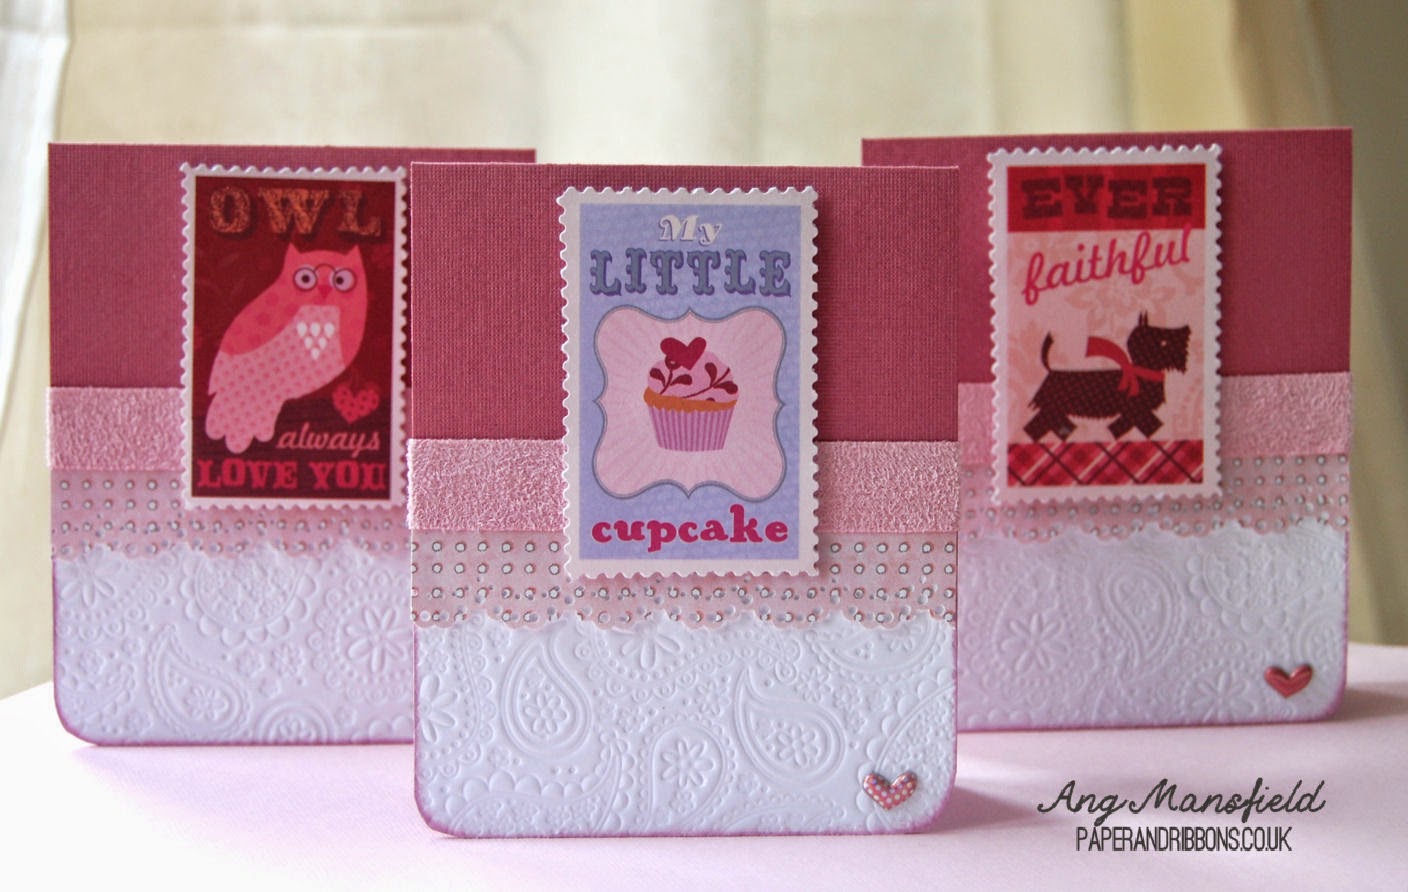 24 Valentine's Day Cards Round Up by Ang Mansfield of Paper and Ribbons